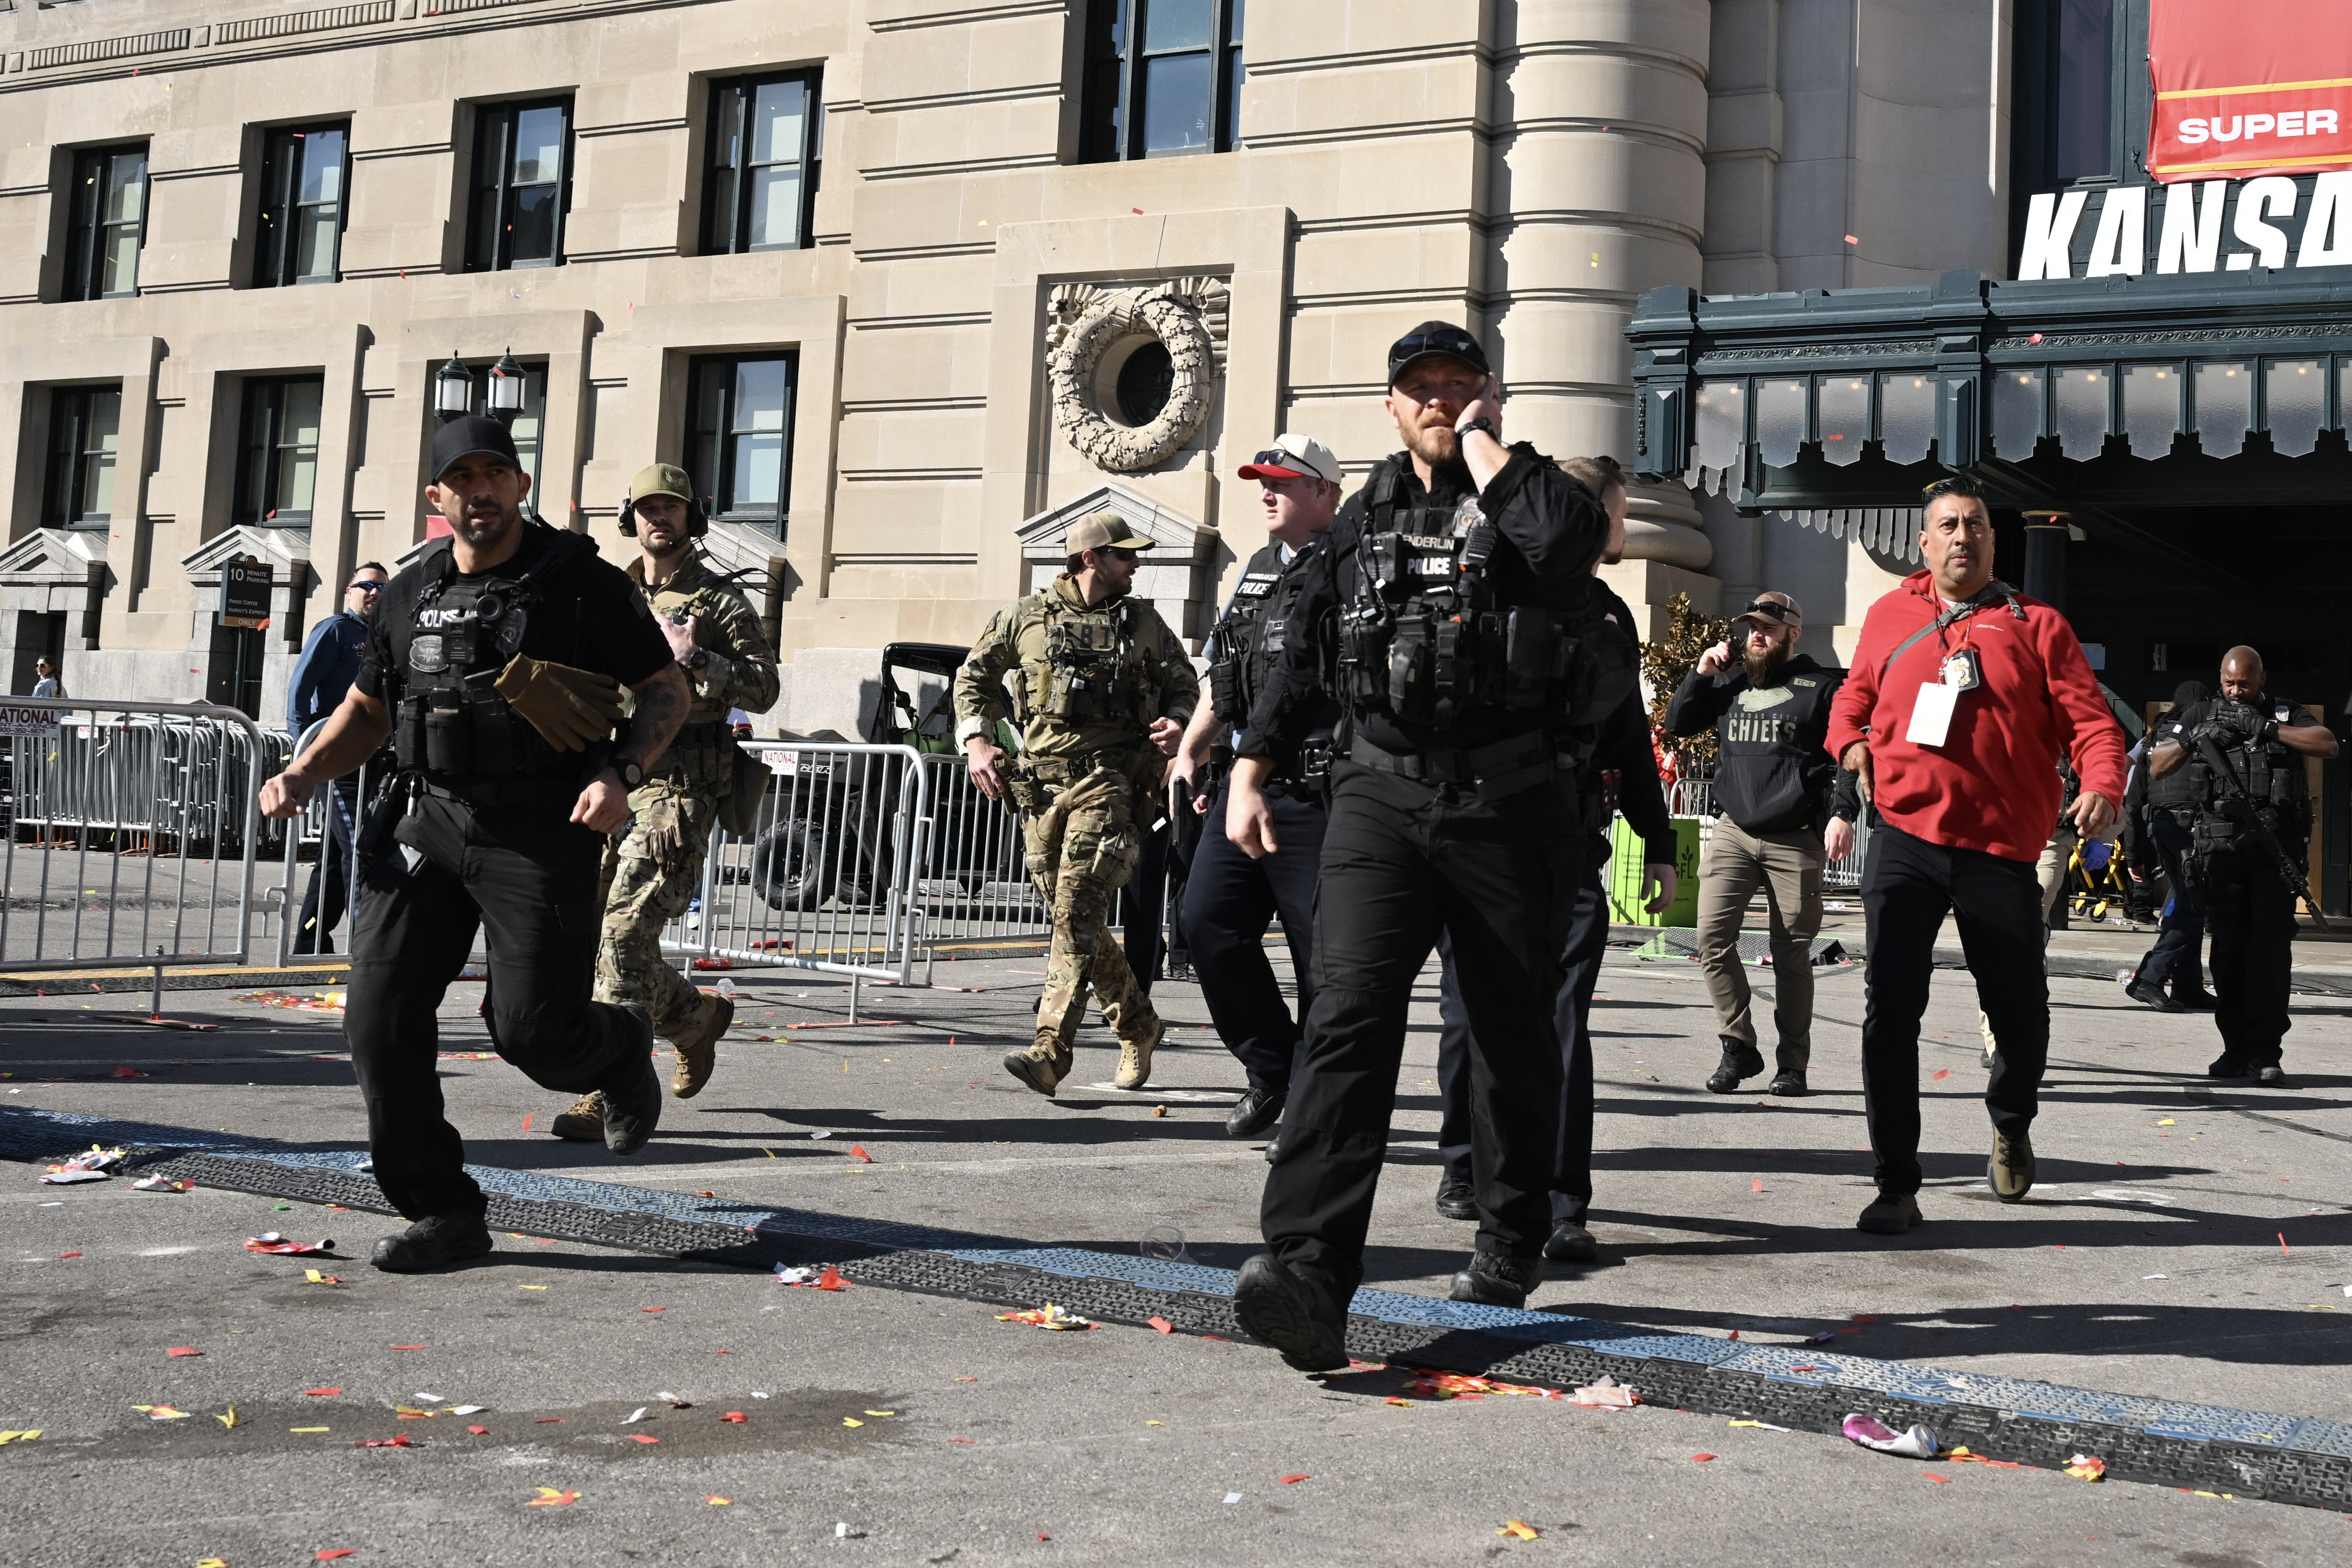 Police and security detail responding to the shooting incident at the Super Bowl LVIII victory parade in Kansas City, Missouri on February 14, 2024 | Source: Getty Images